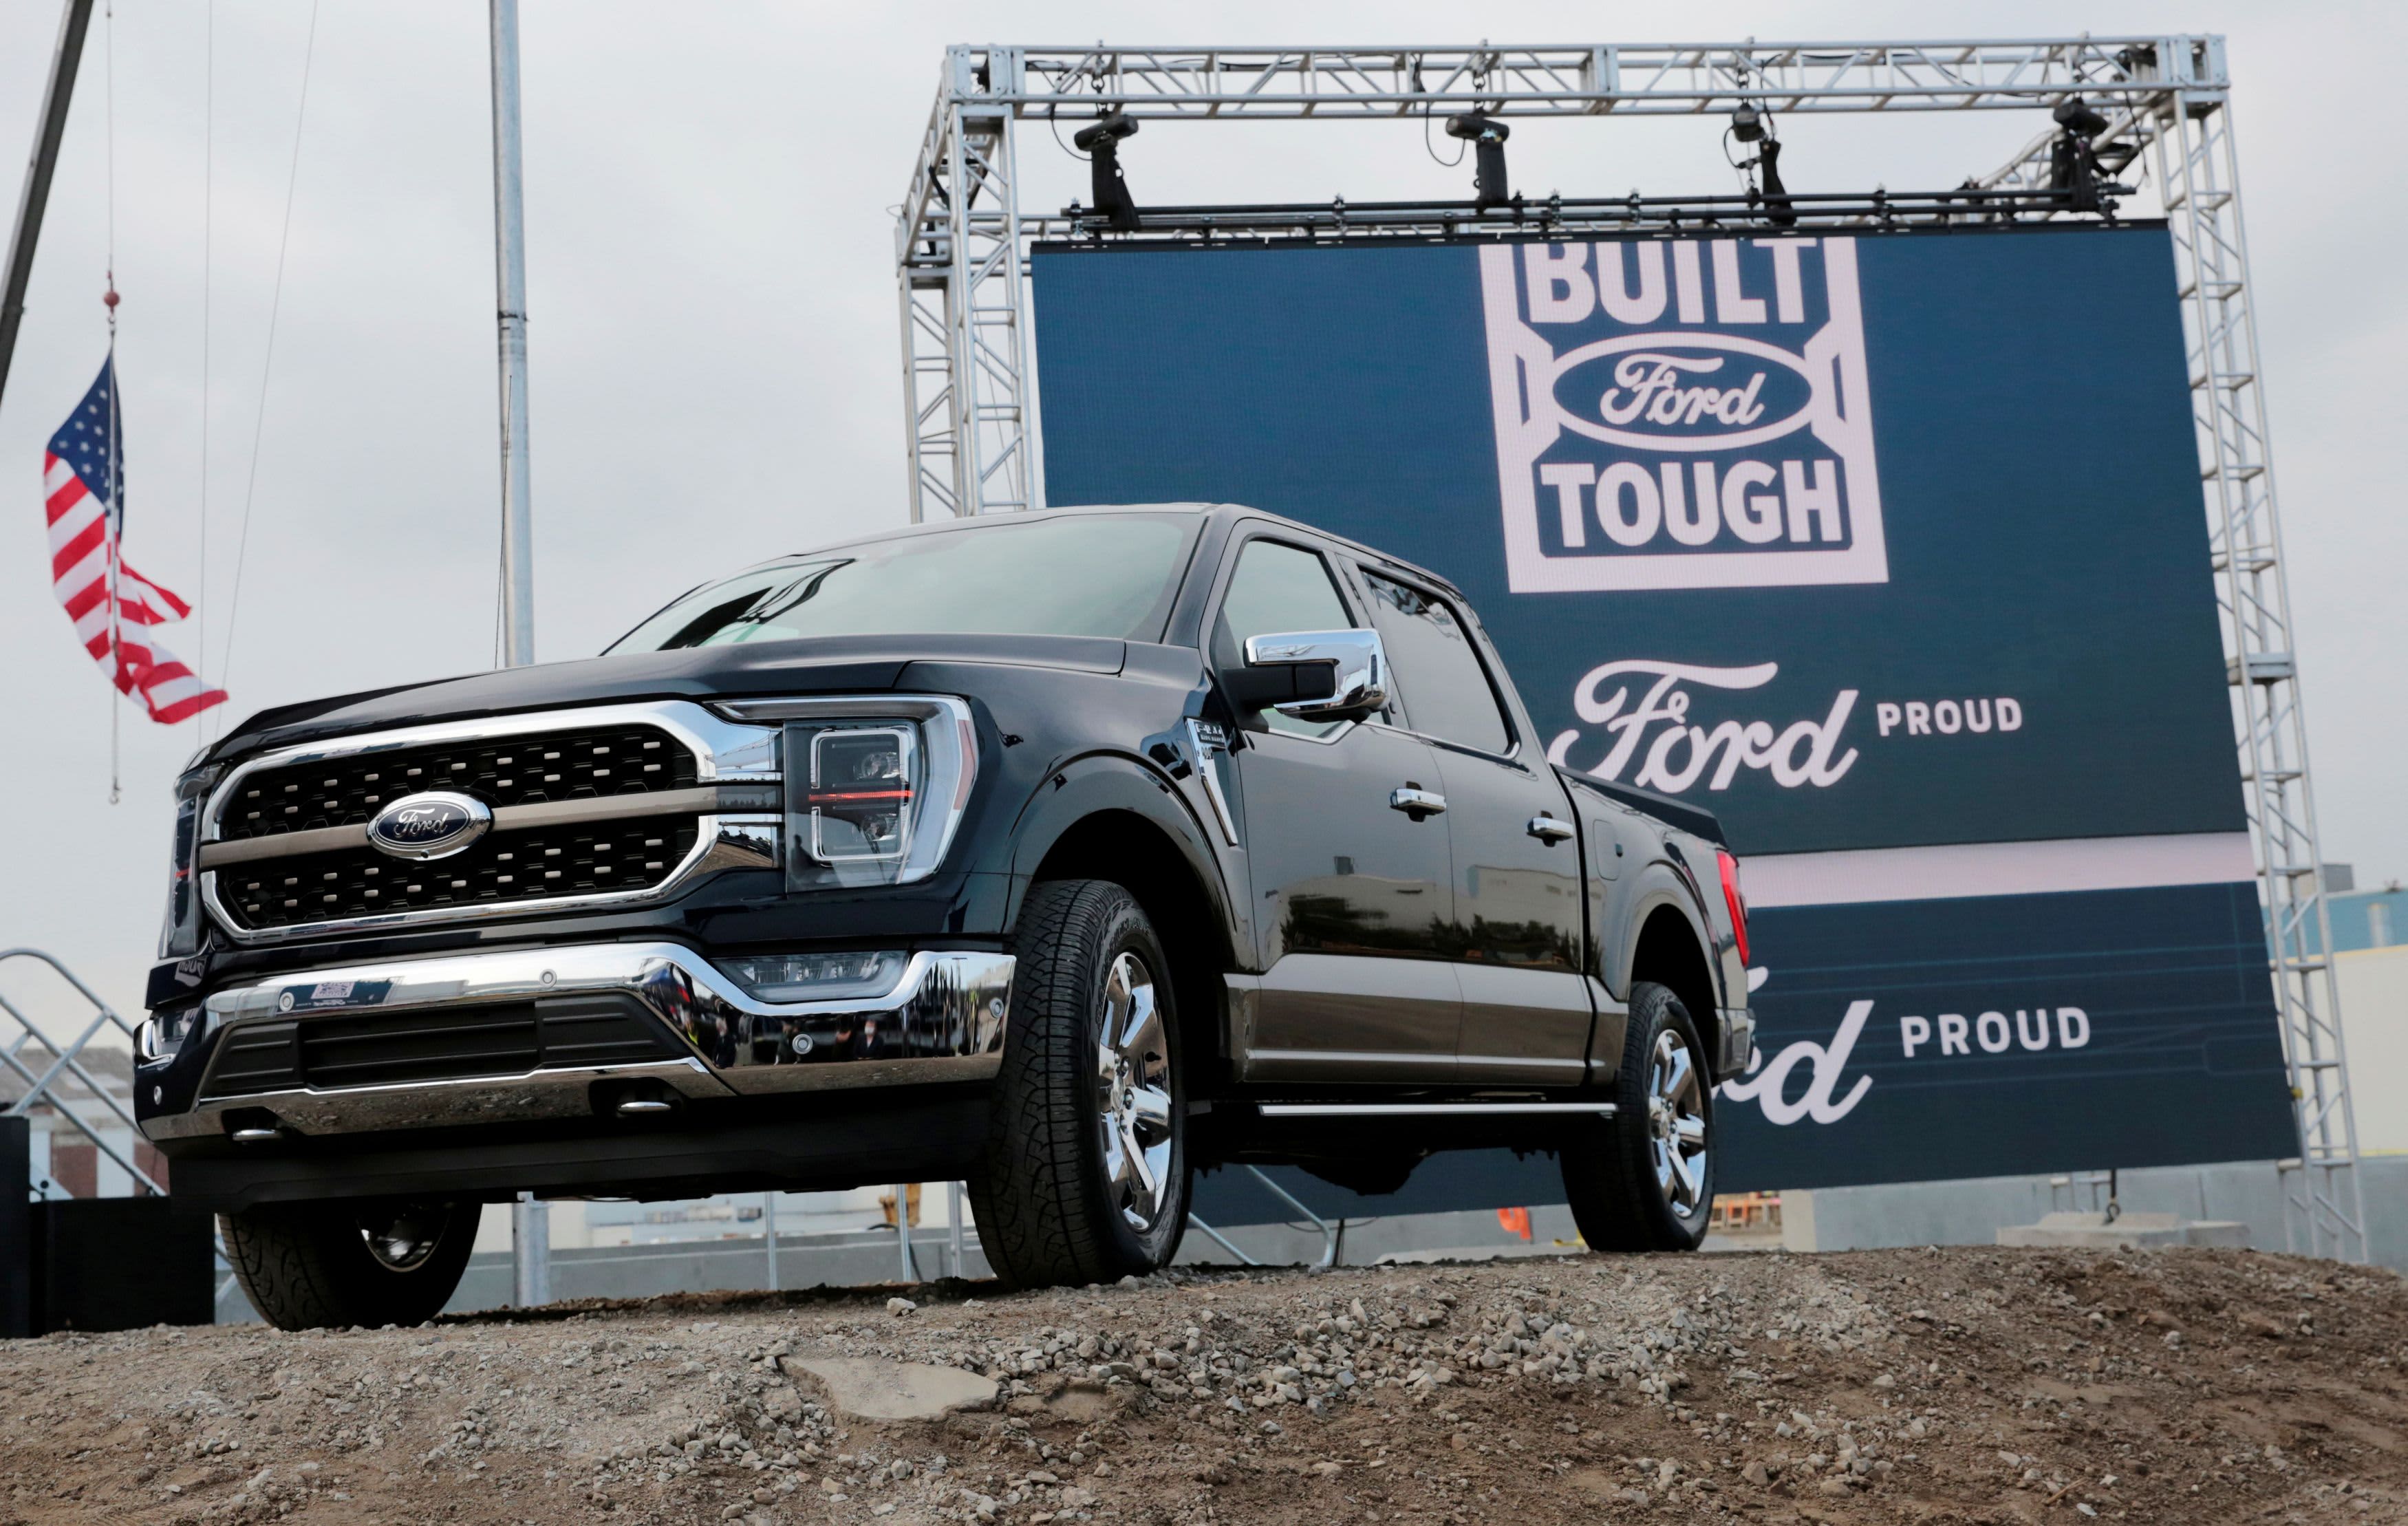 Ford shifts, partially building the F-150 due to a lack of chips